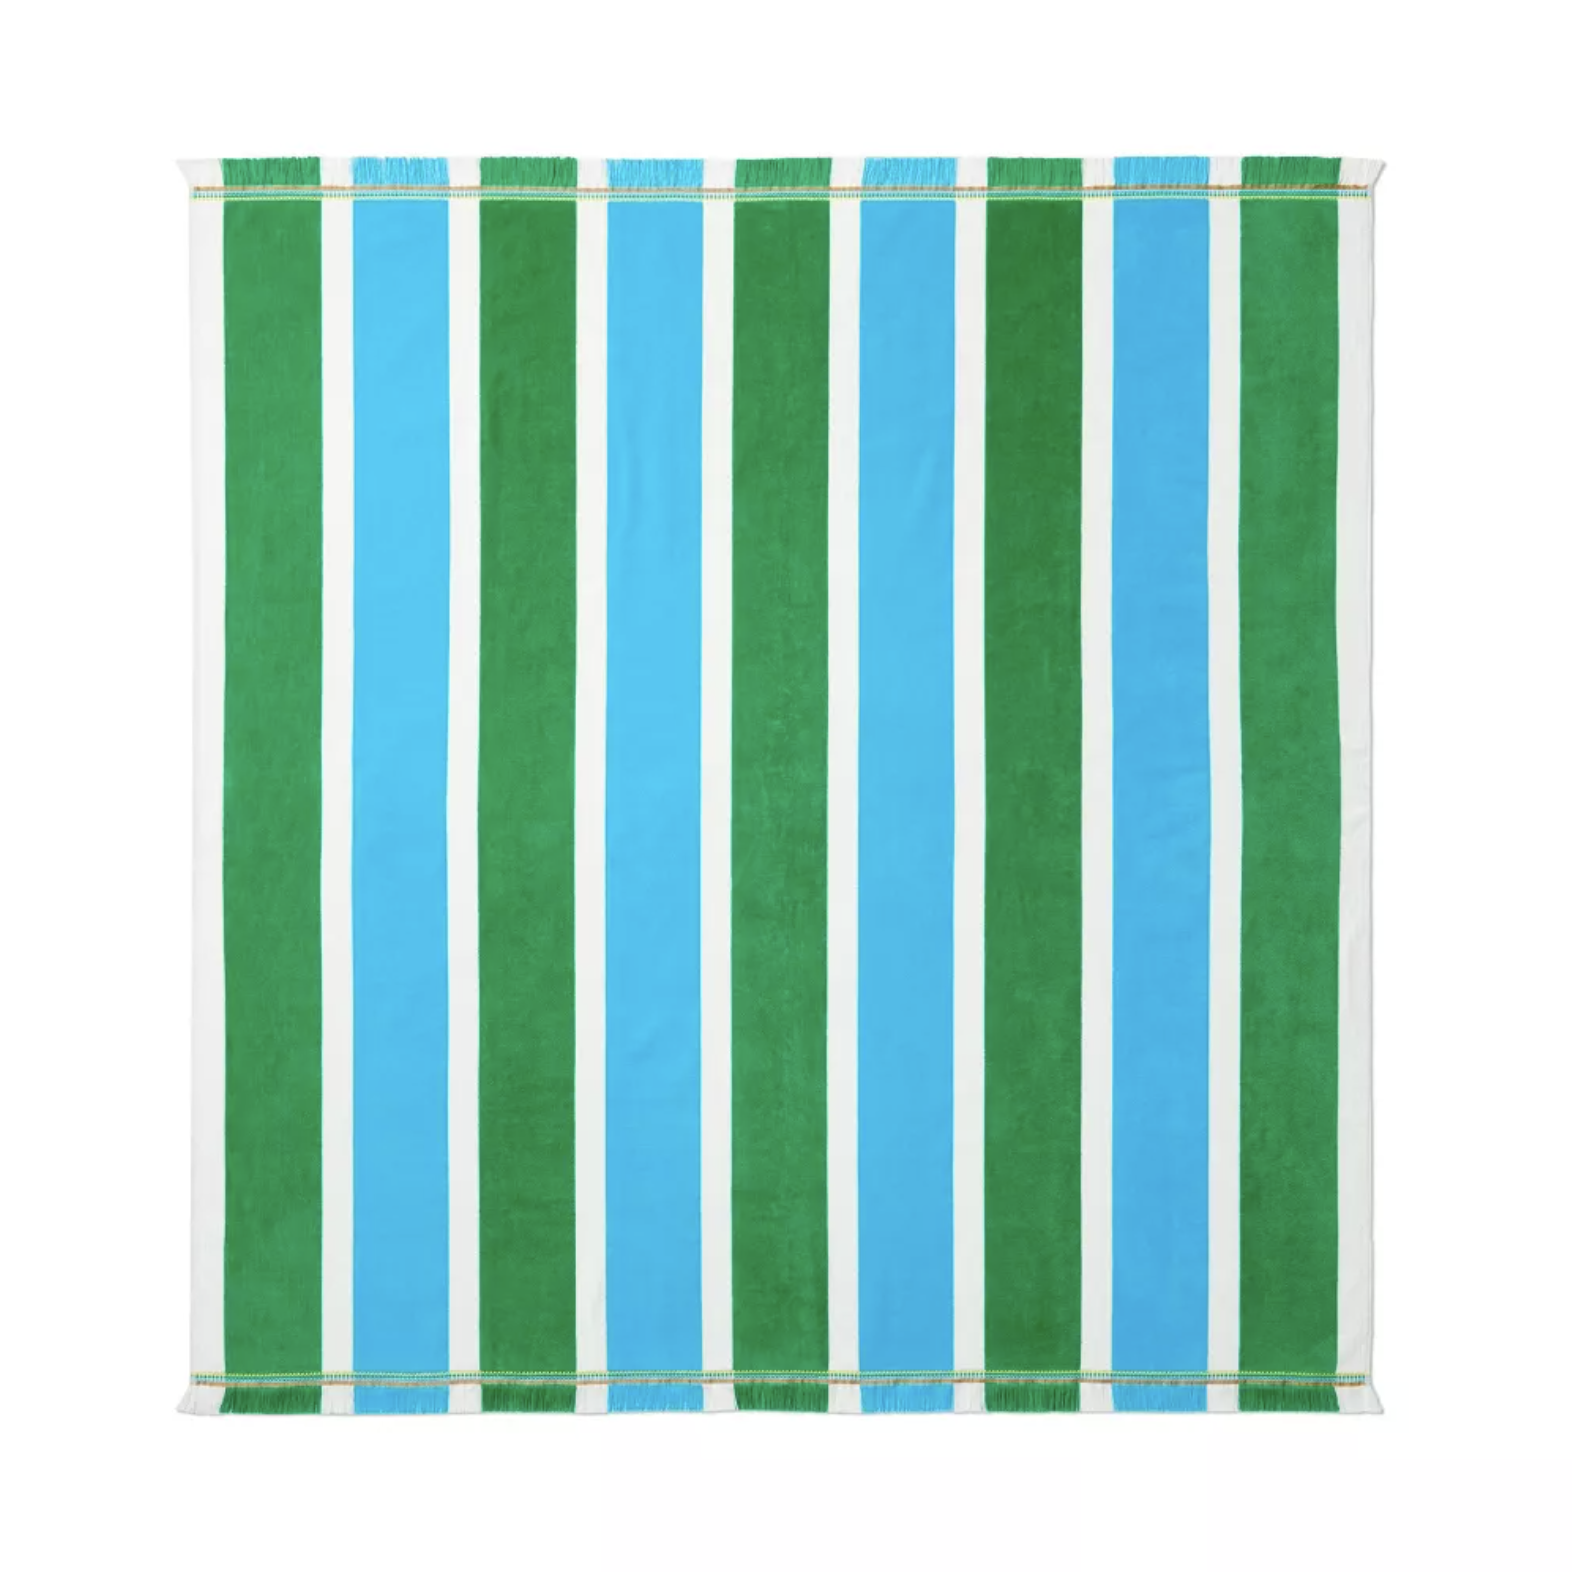 Blue, green, and white square striped beach towel